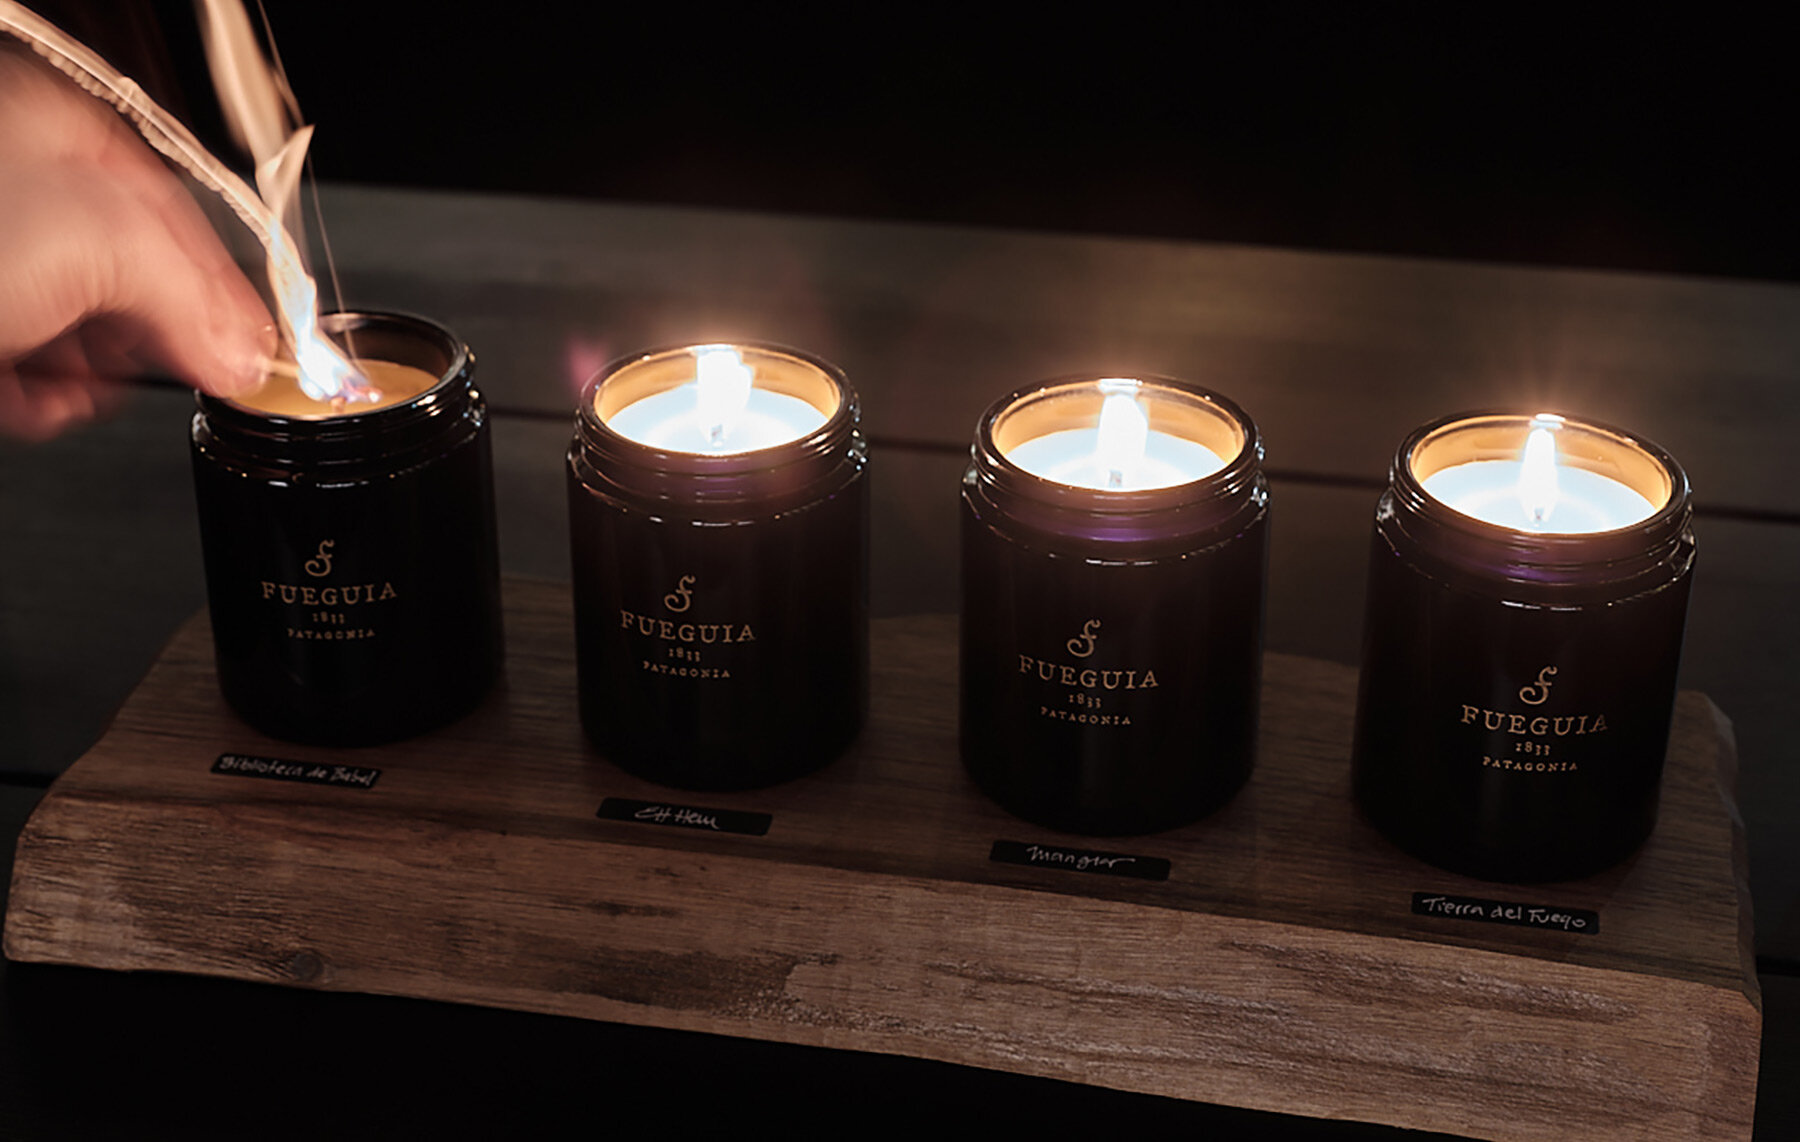 fueguia 1833's home fragrance collection offers a holistic scent